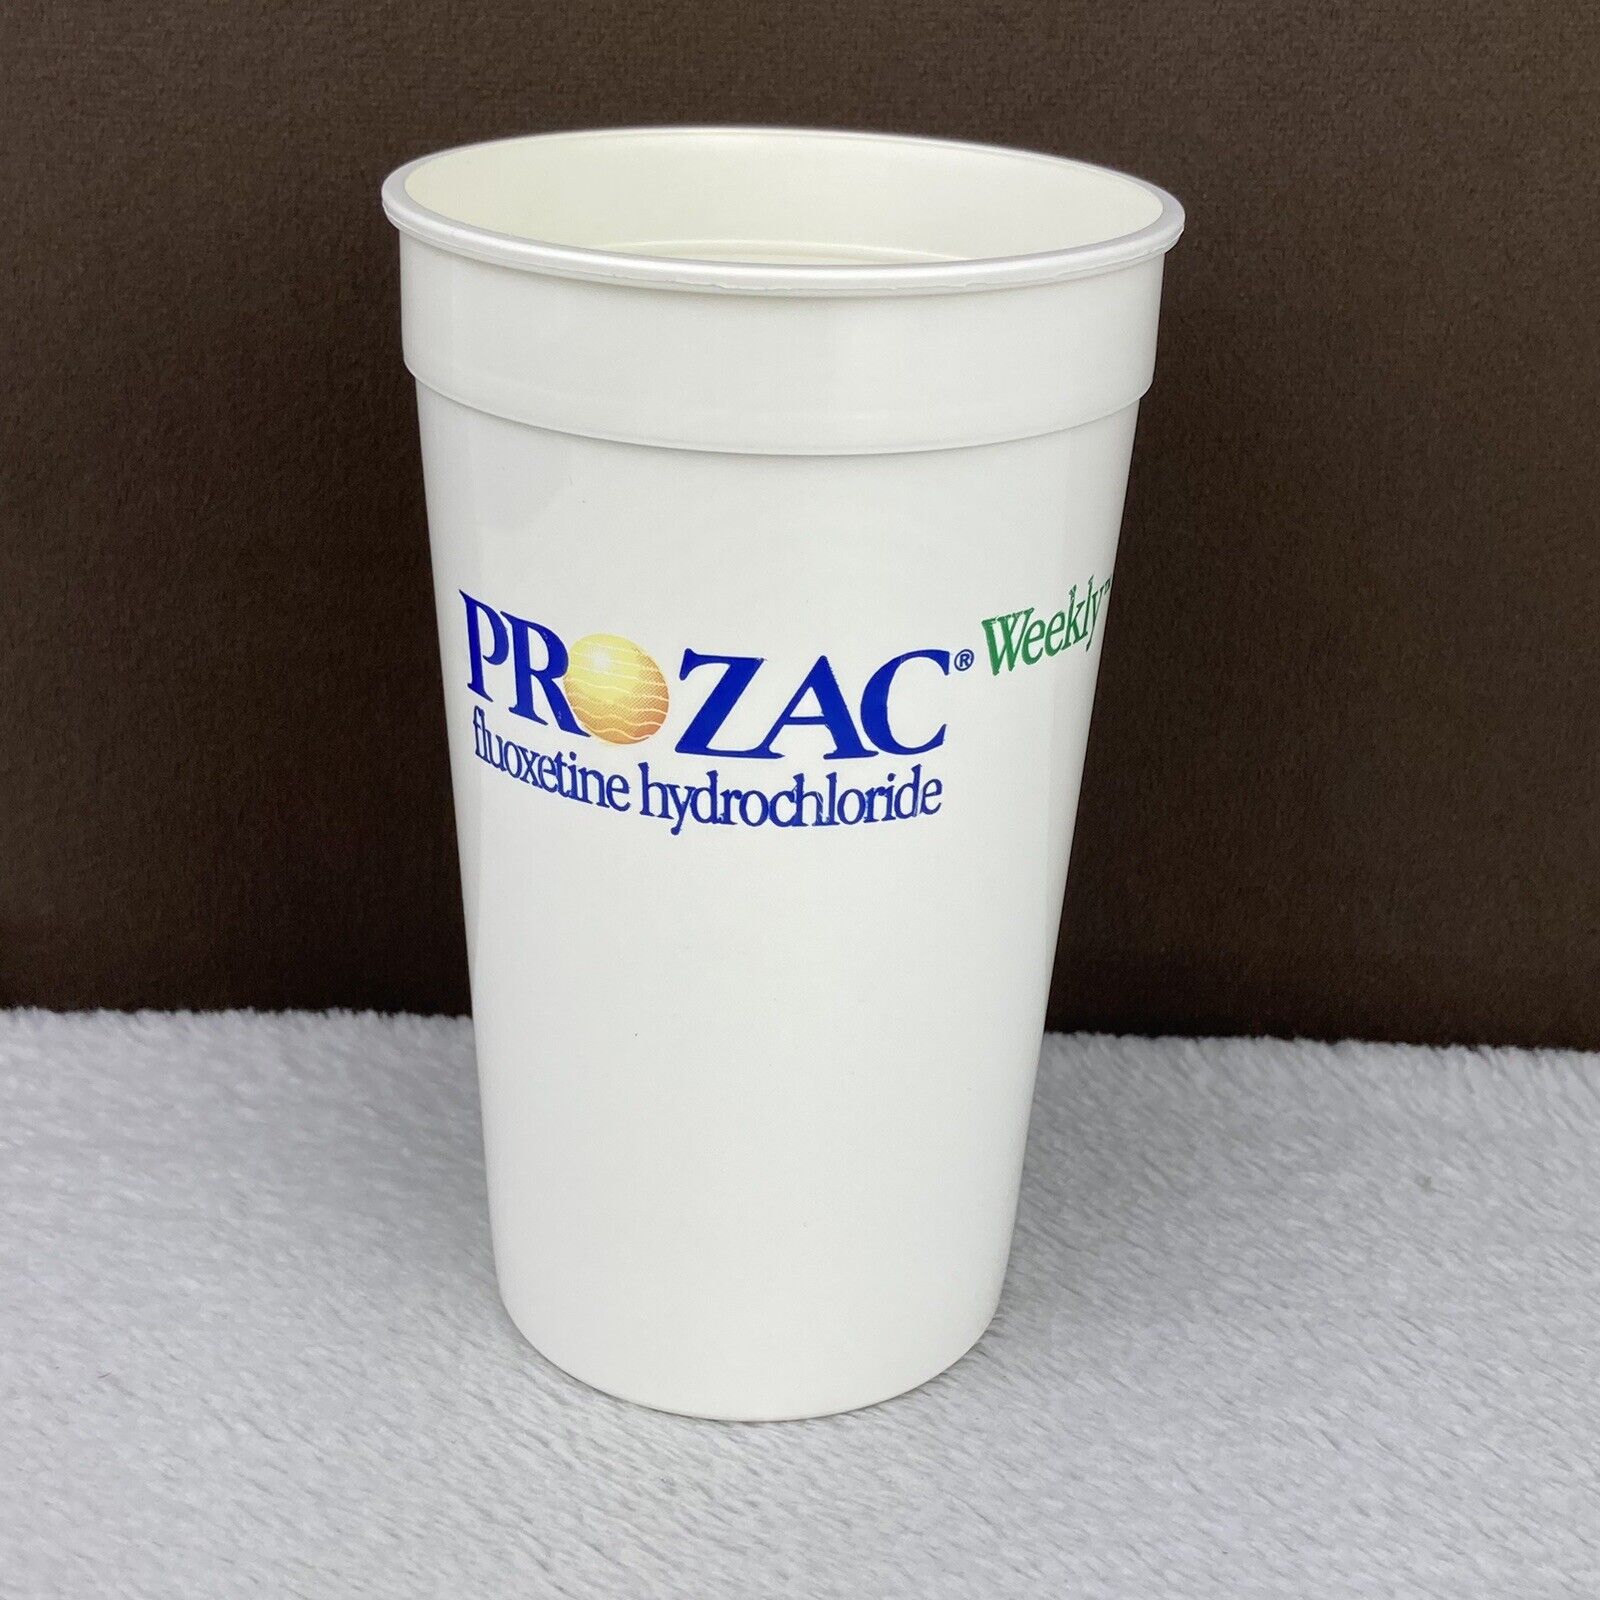 Vtg Prozac Weekly Eli Lilly Pharmaceutical Drug Rep Promo Advertising Cup RARE